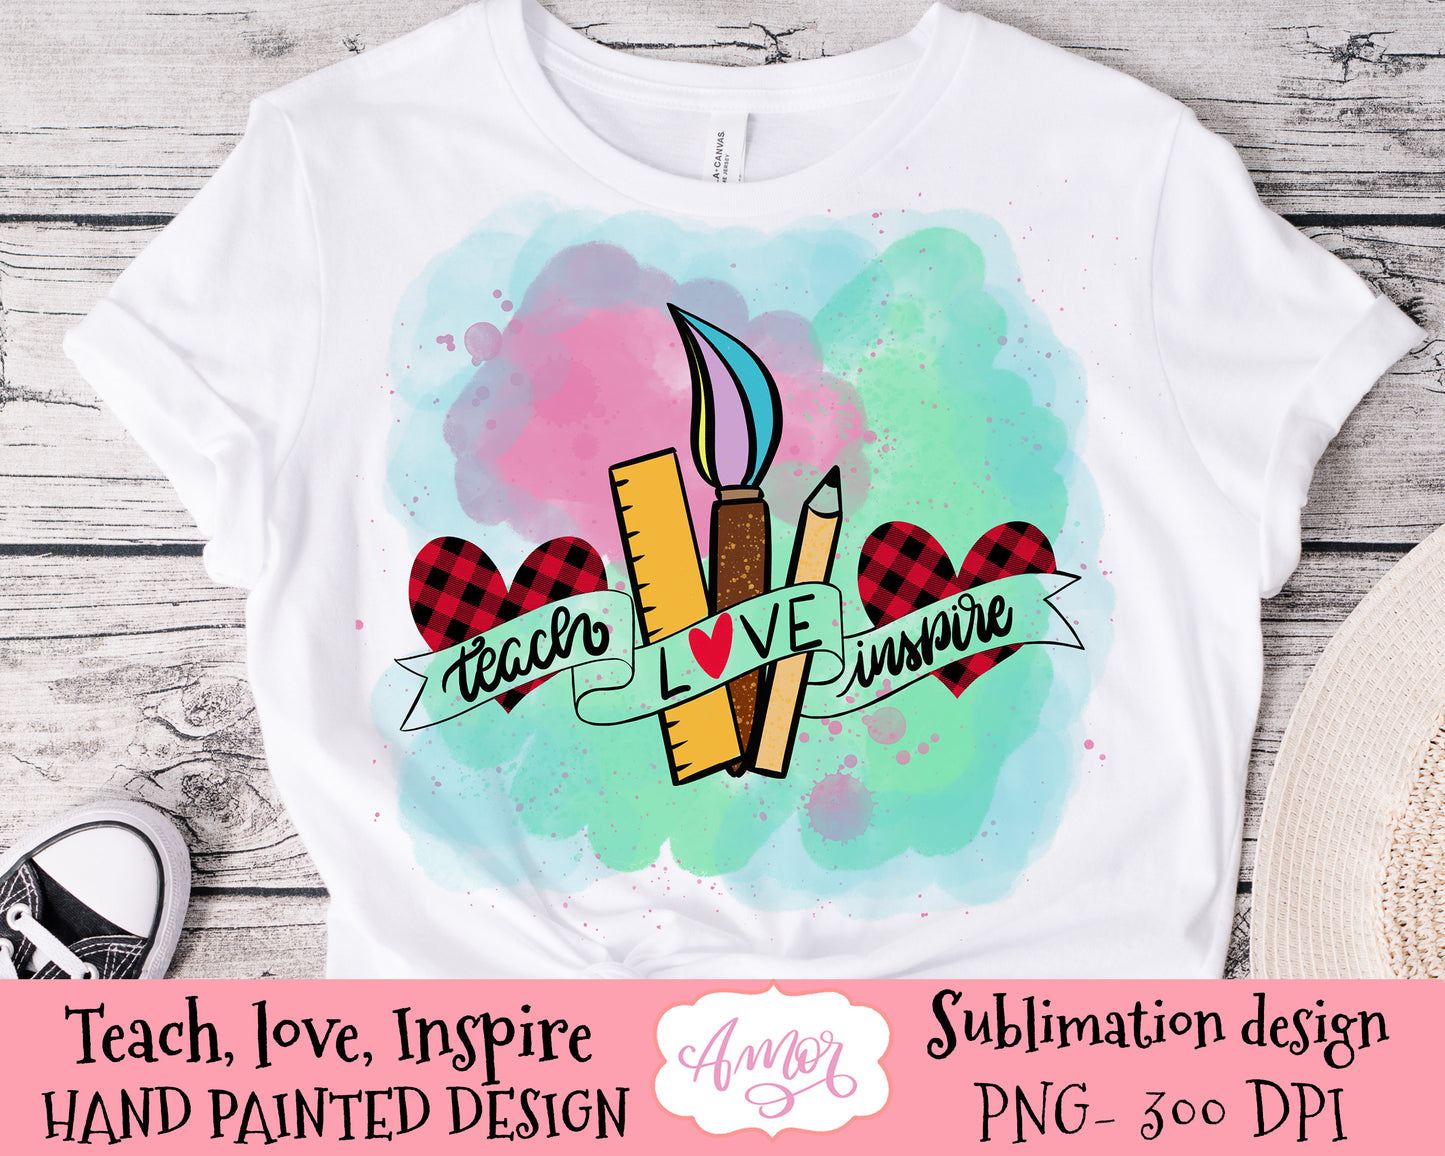 Teach love inspire PNG sublimation design for T-shirts